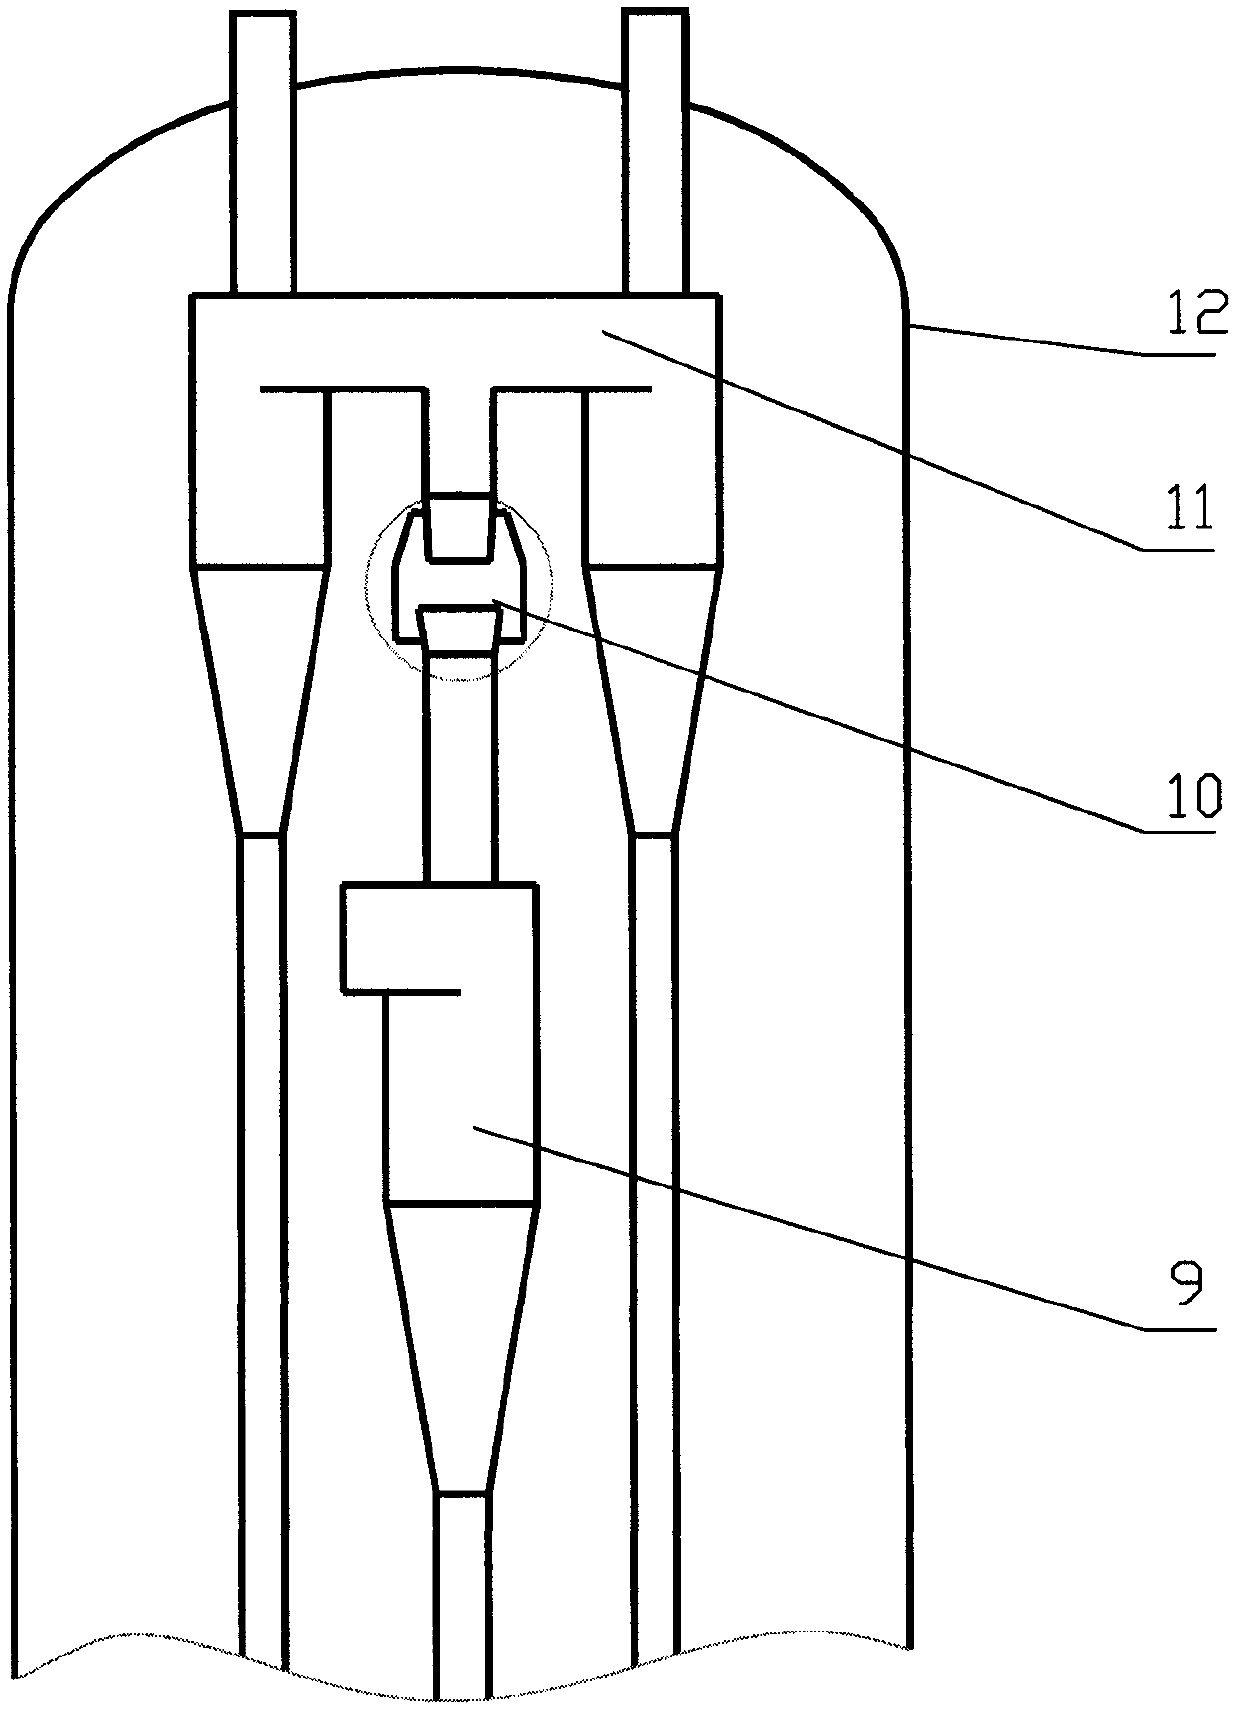 Novel connecting mode and component between rough rotator and top rotator in FCC disengager